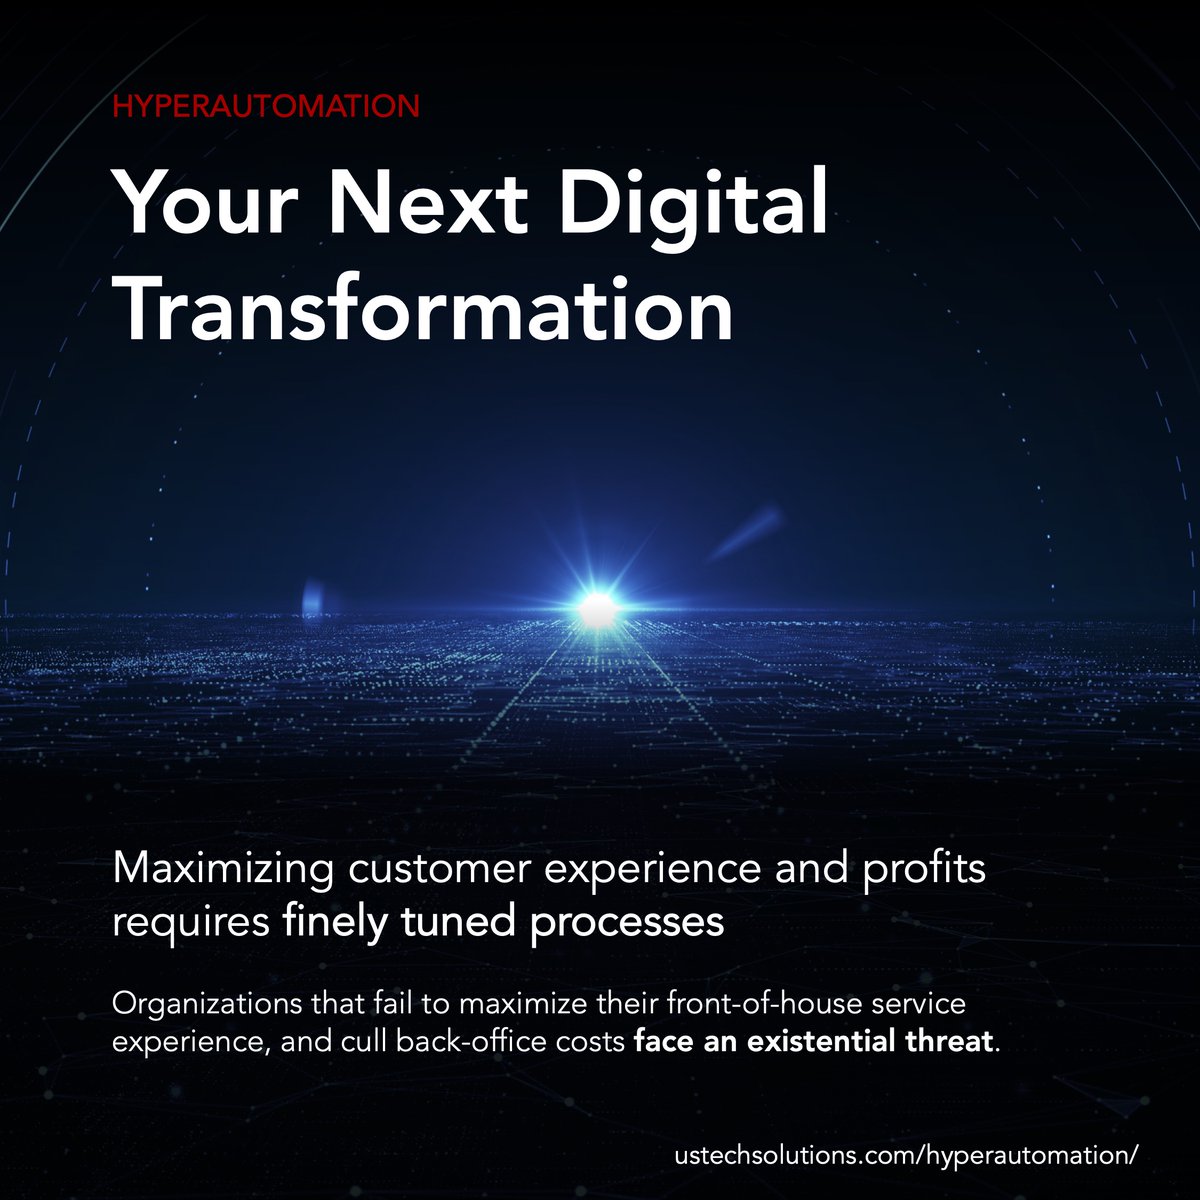 Automate faster with our ready-to-deploy #Hyperautomation accelerator tools.

#DigitalTransformation #TalentStrategy #DigitalStrategy #DigitalTechnology #StaffingSolutions #TalentSolutions #Staffing #ITStaffing